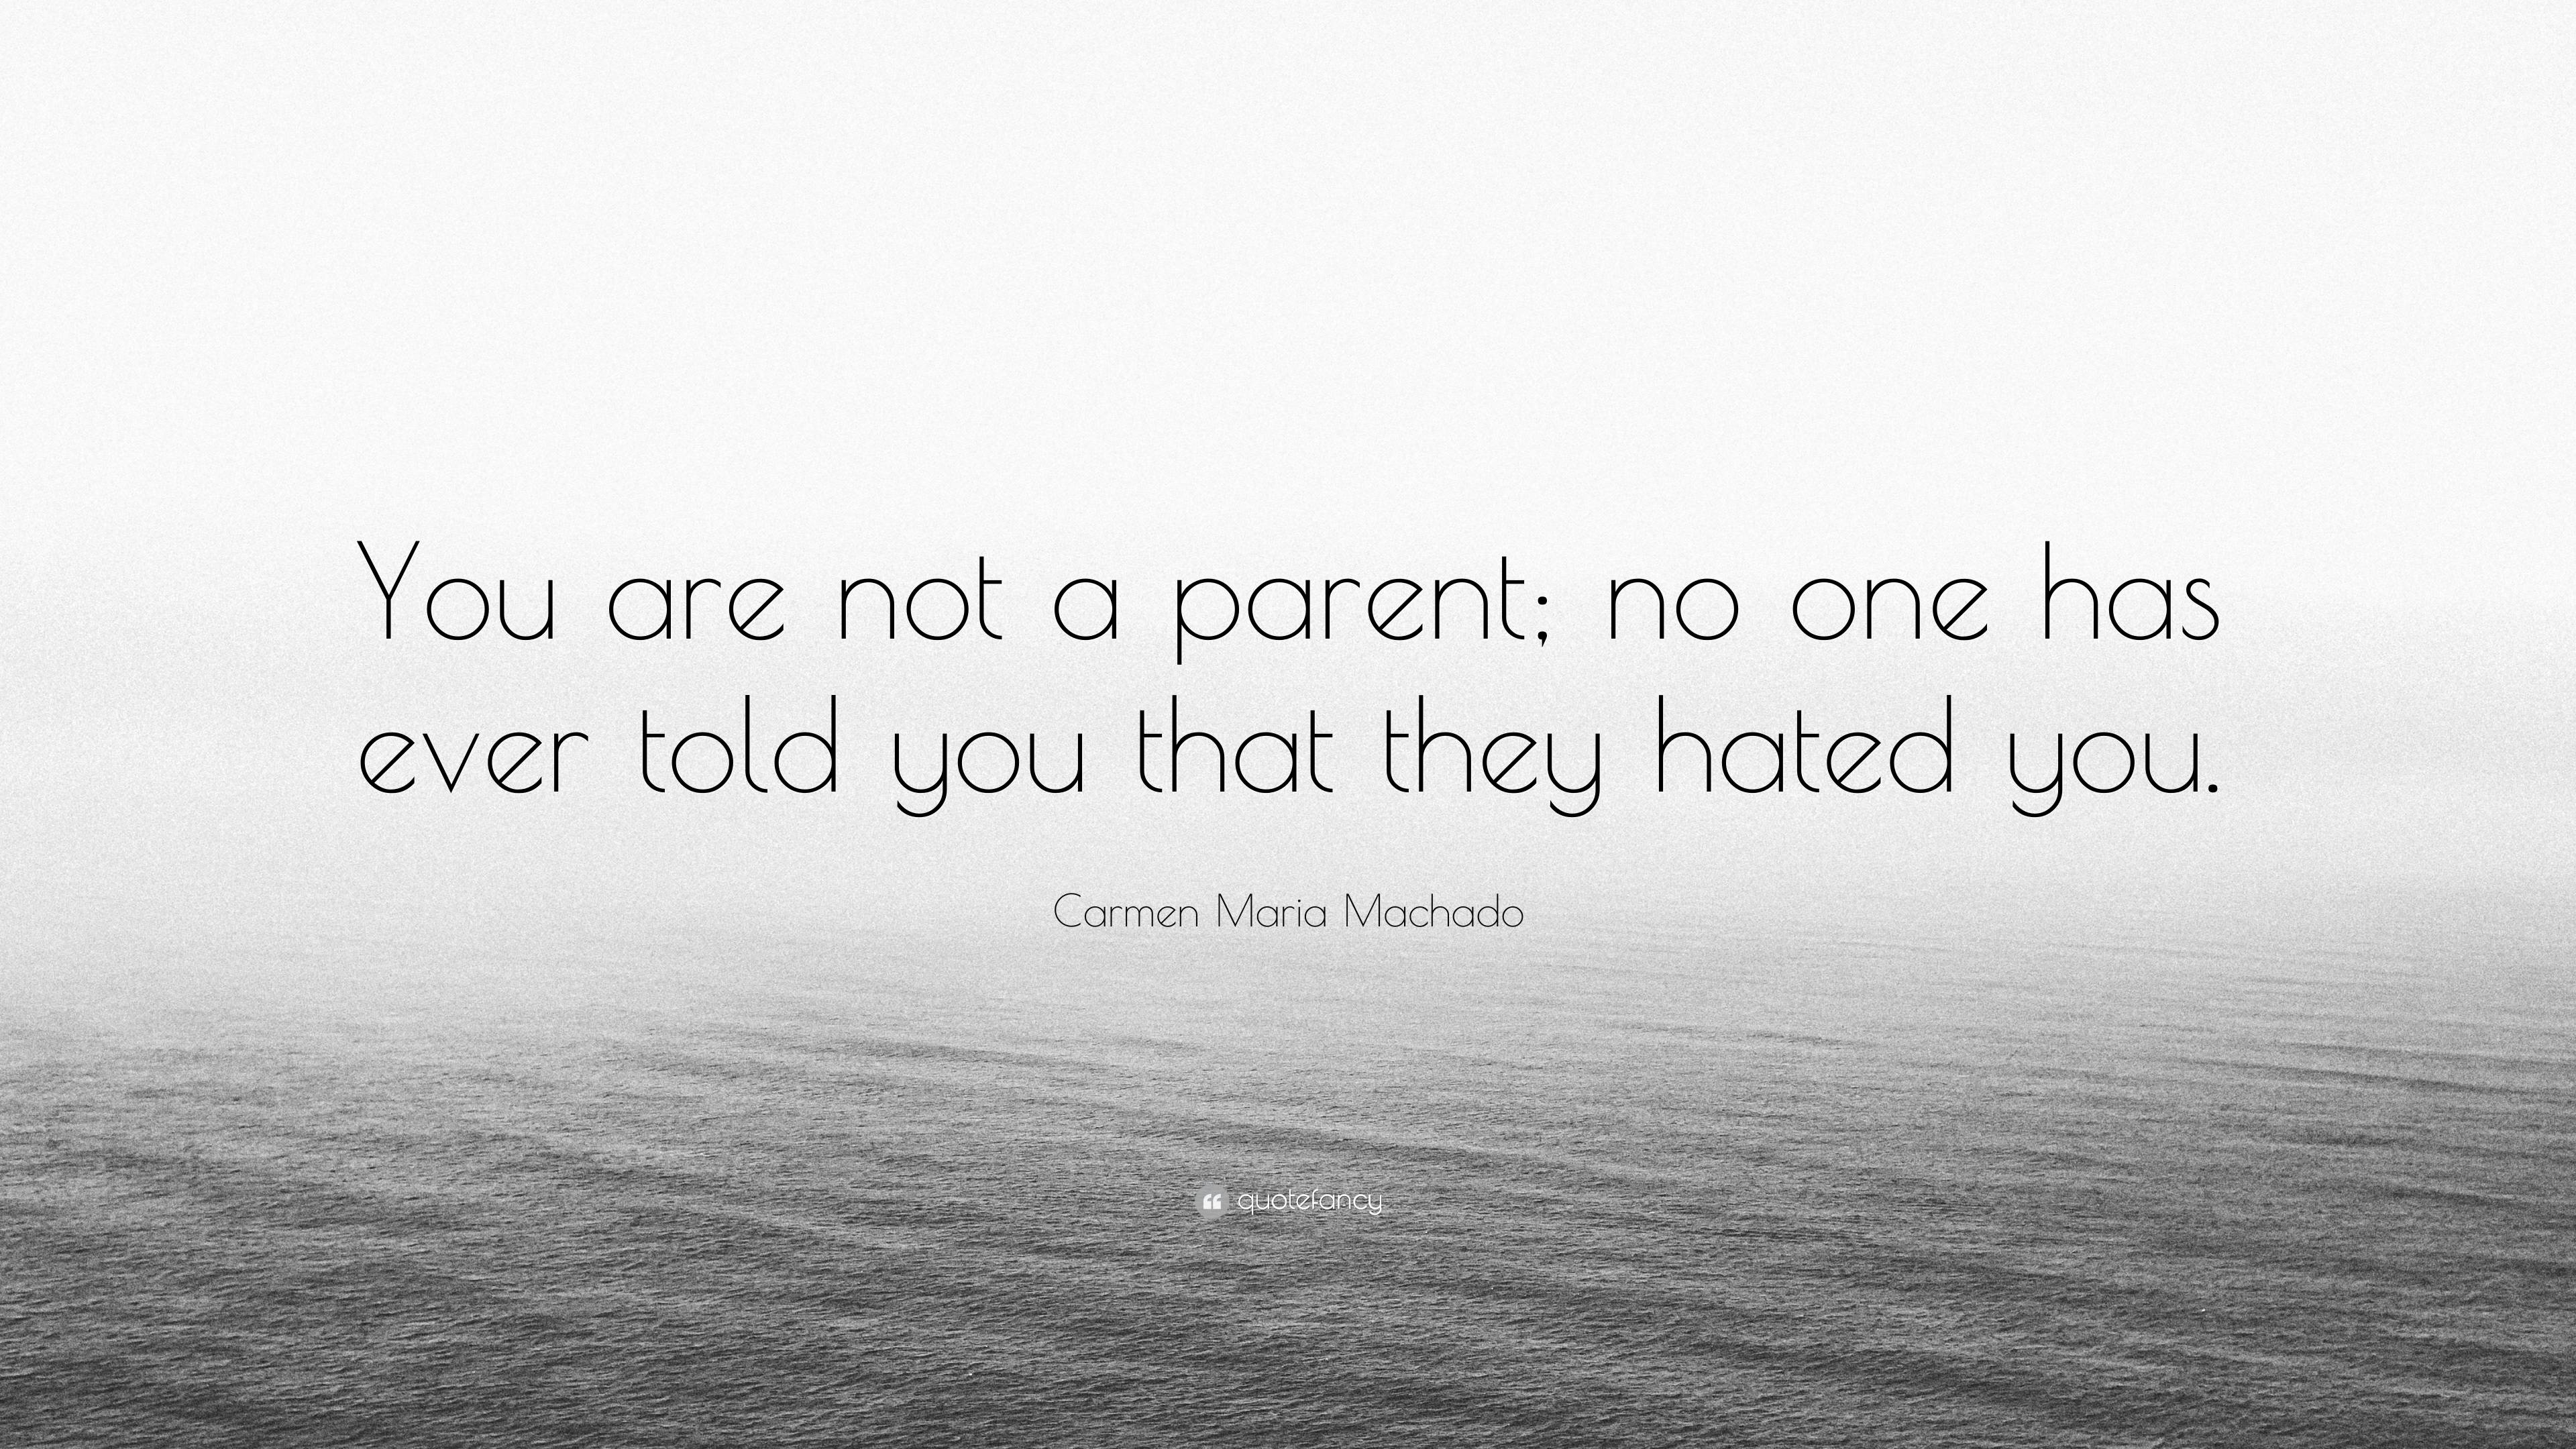 Carmen Maria Machado Quote: “You are not a parent; no one has ever told ...